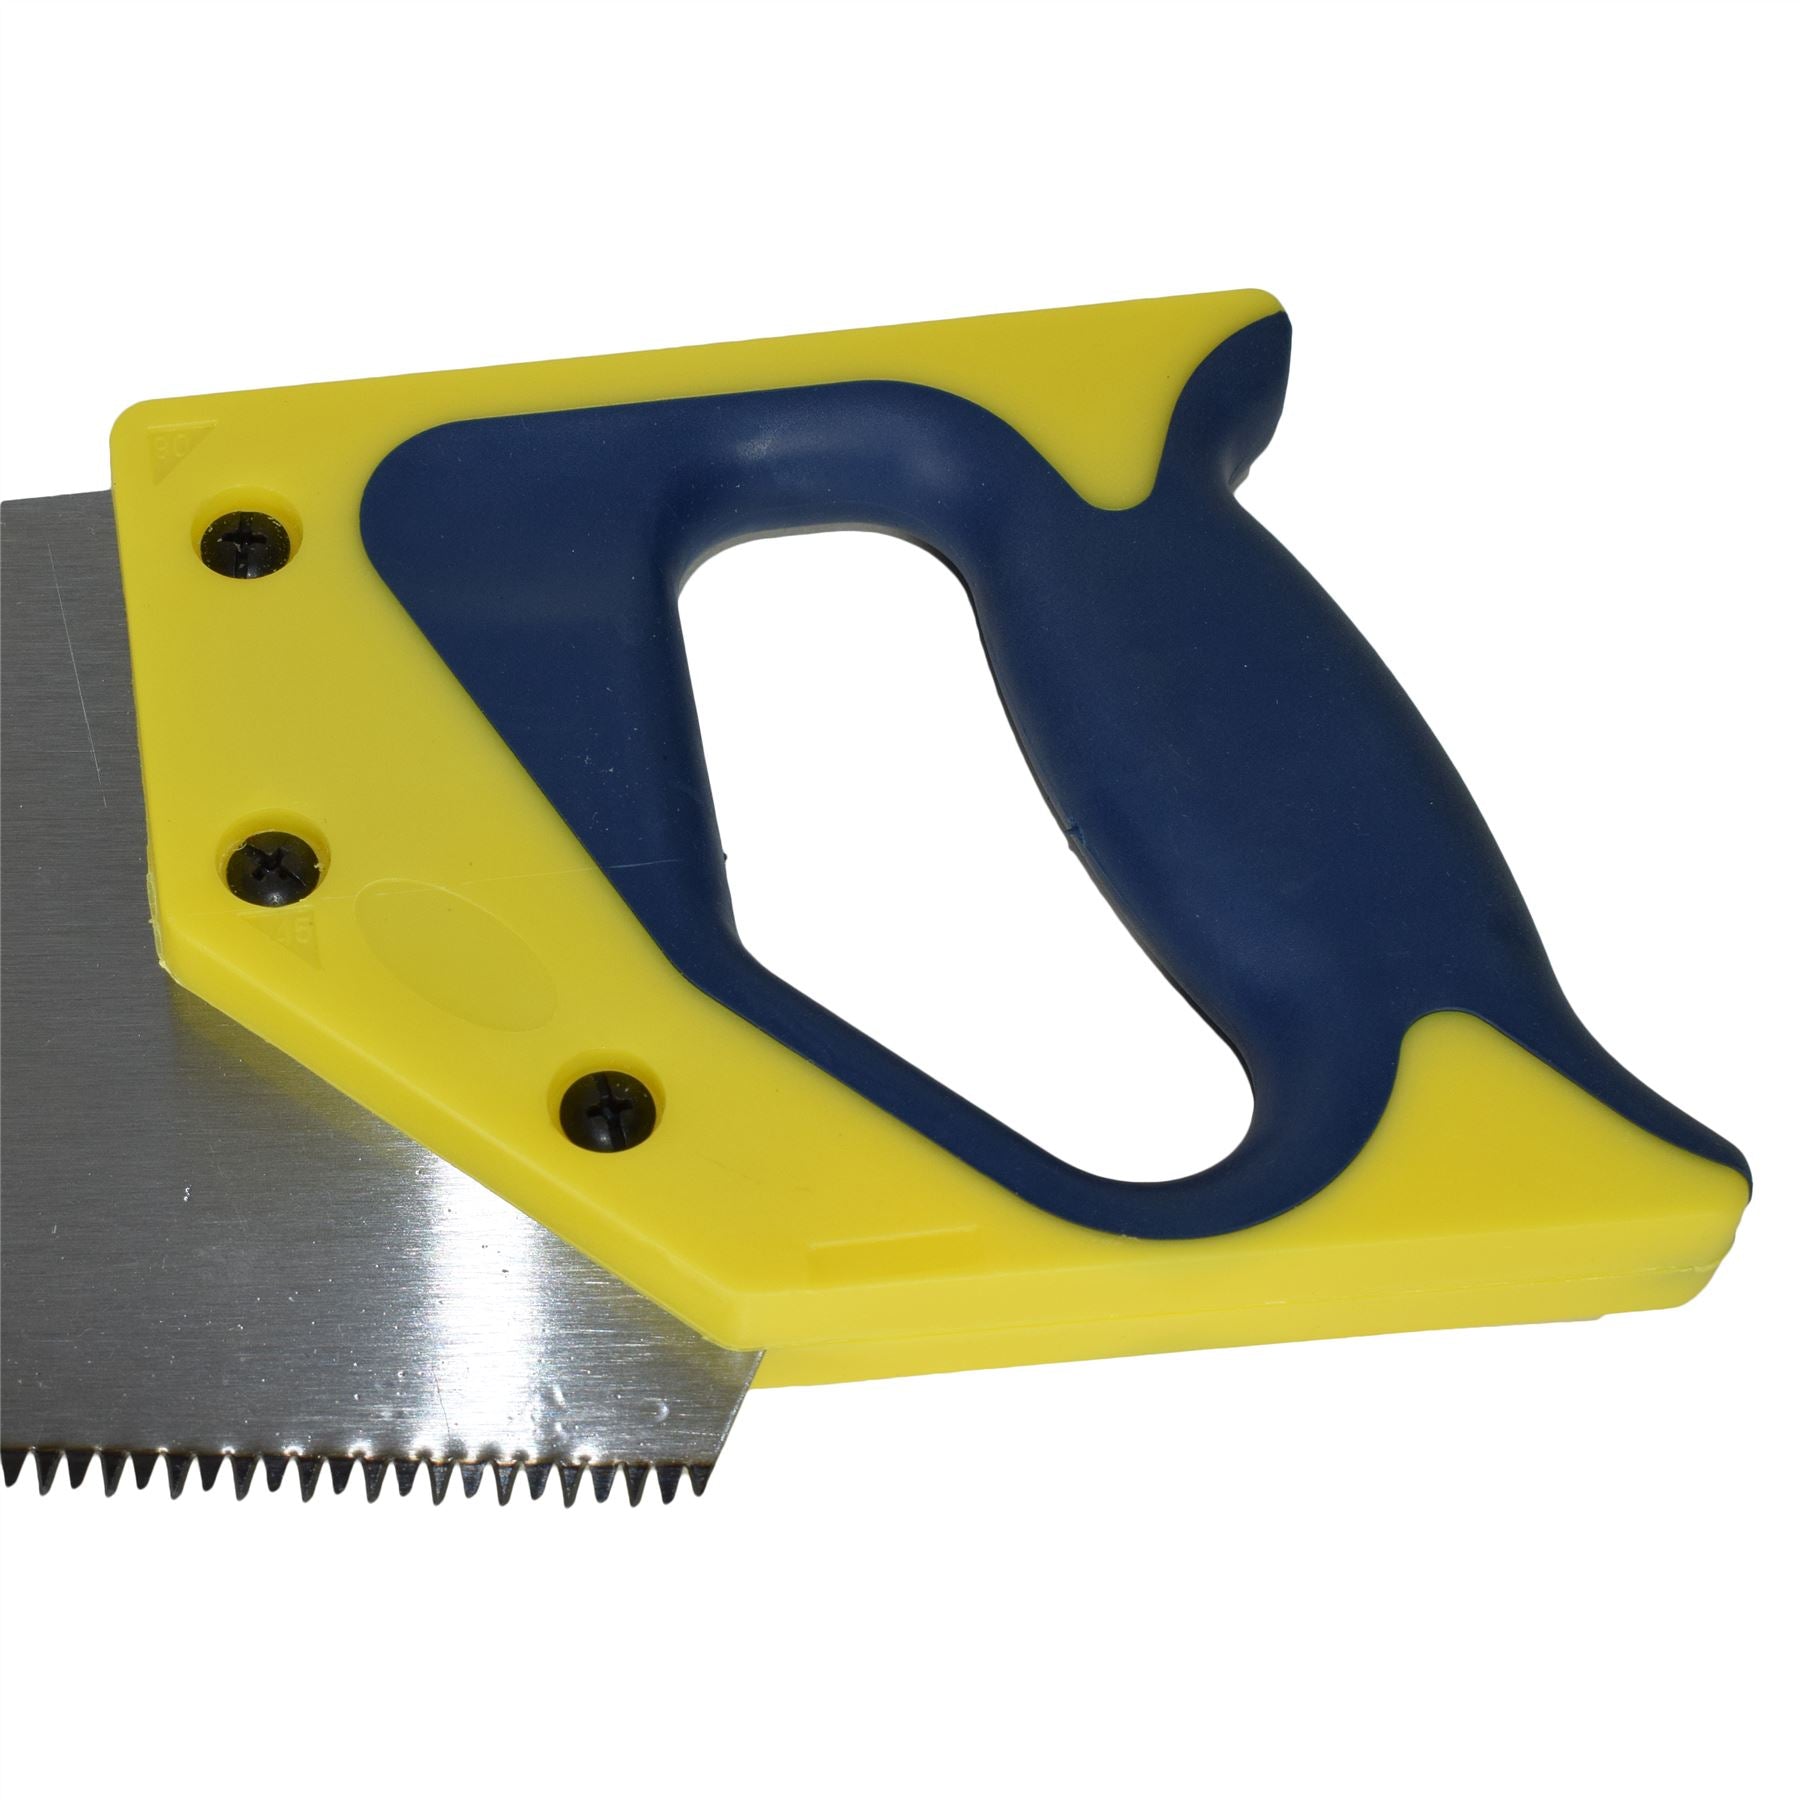 Hardpoint Handsaw Wood Saw Cutter Cutting Tool With Soft grip Handle 22" Blade